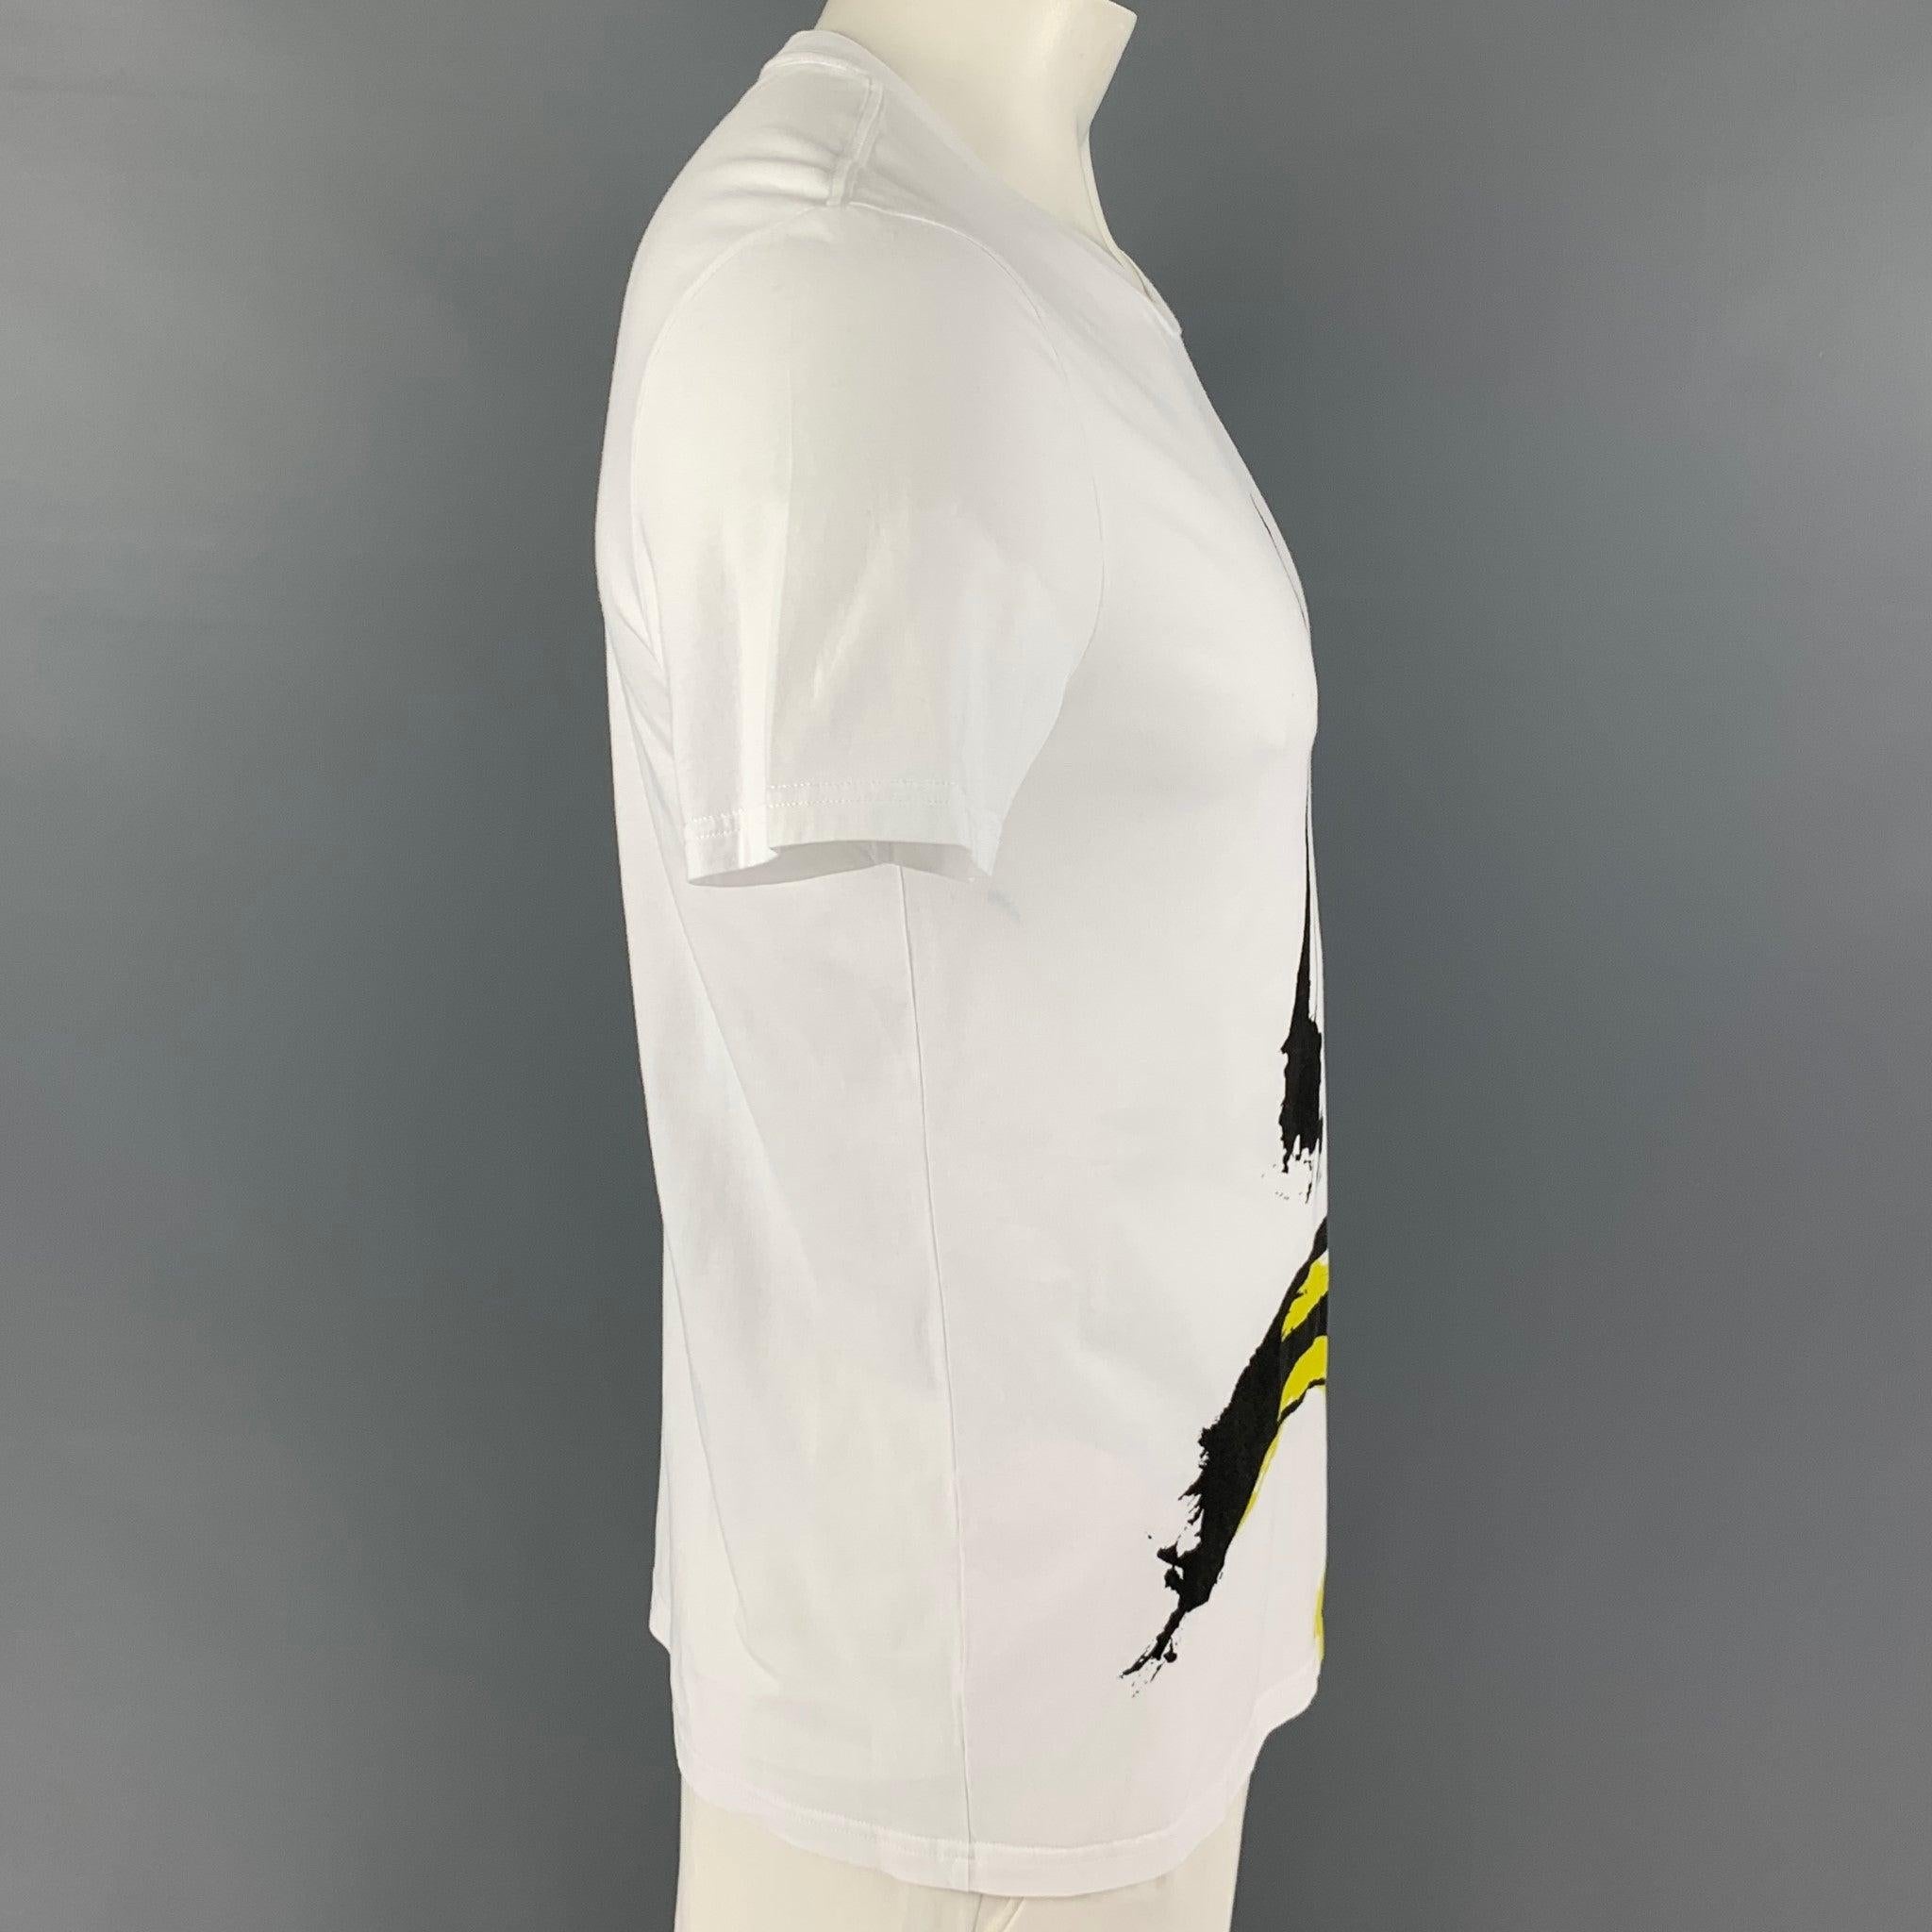 BURBERRY BRIT t-shirt comes in a white & black cotton featuring a graphic and a crew-neck.
Excellent
Pre-Owned Condition. 

Marked:   L  

Measurements: 
 
Shoulder:
18.5 inches Chest: 40 inches Sleeve: 8 inches Length: 27 inches 
  
  
 
Reference: